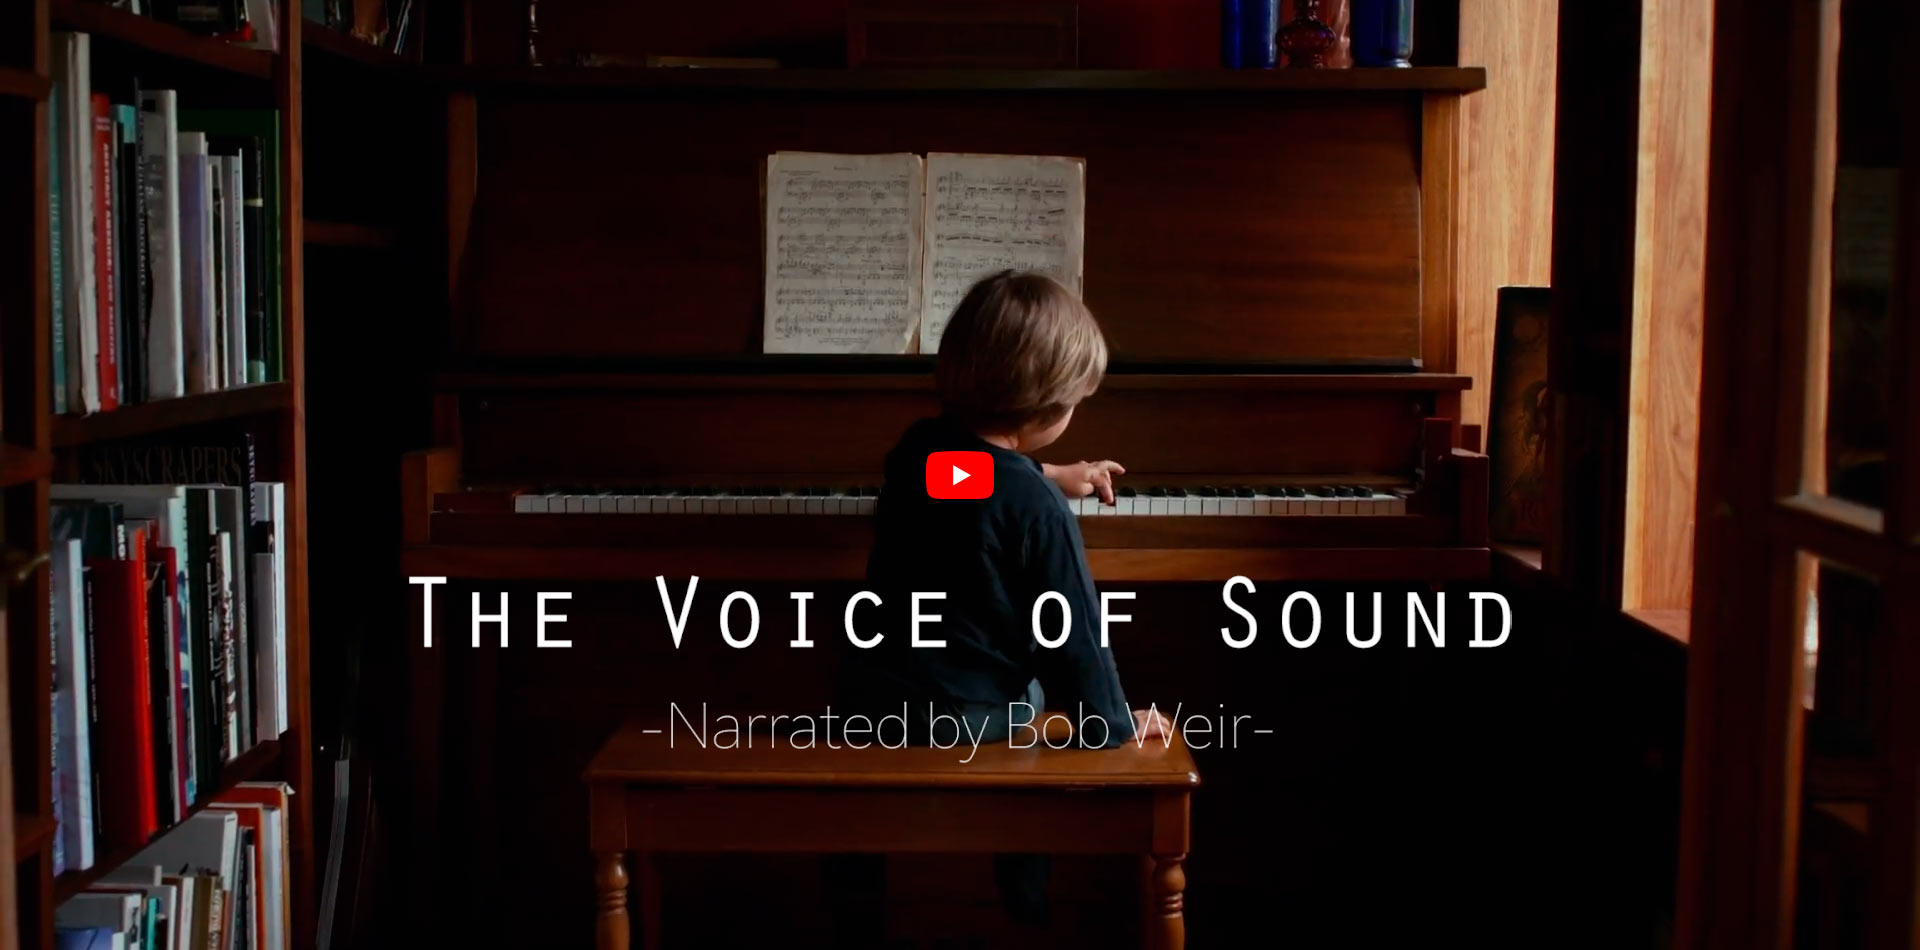 The Voice of Sound